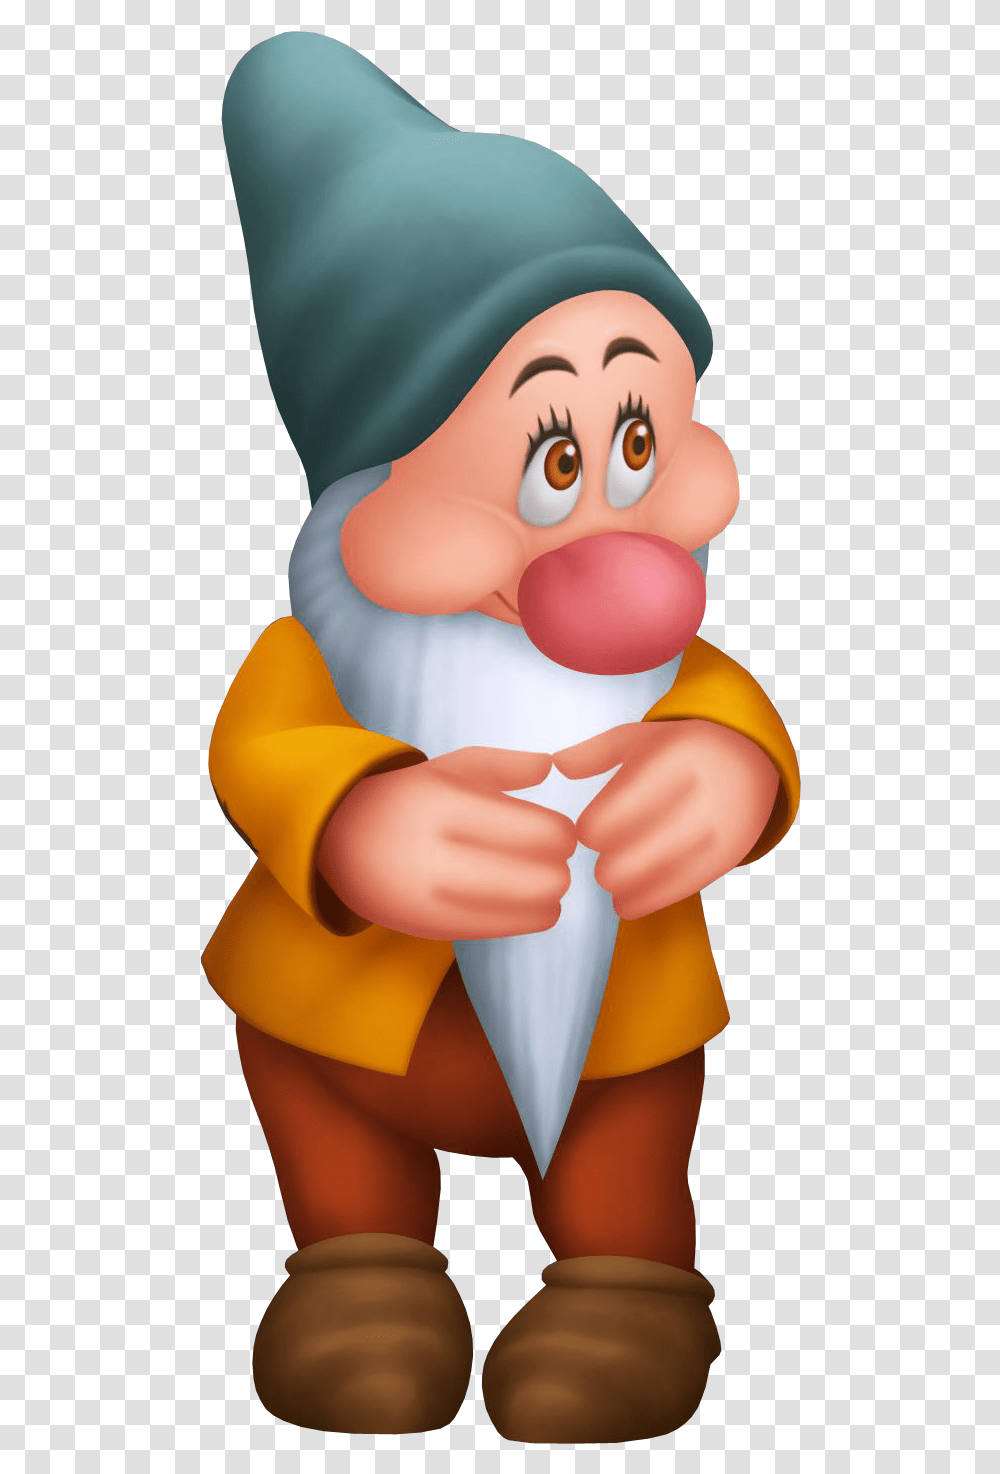 Dwarf Images All Snow White And The Seven Dwarfs Kingdom Hearts, Sweets, Food, Confectionery, Person Transparent Png